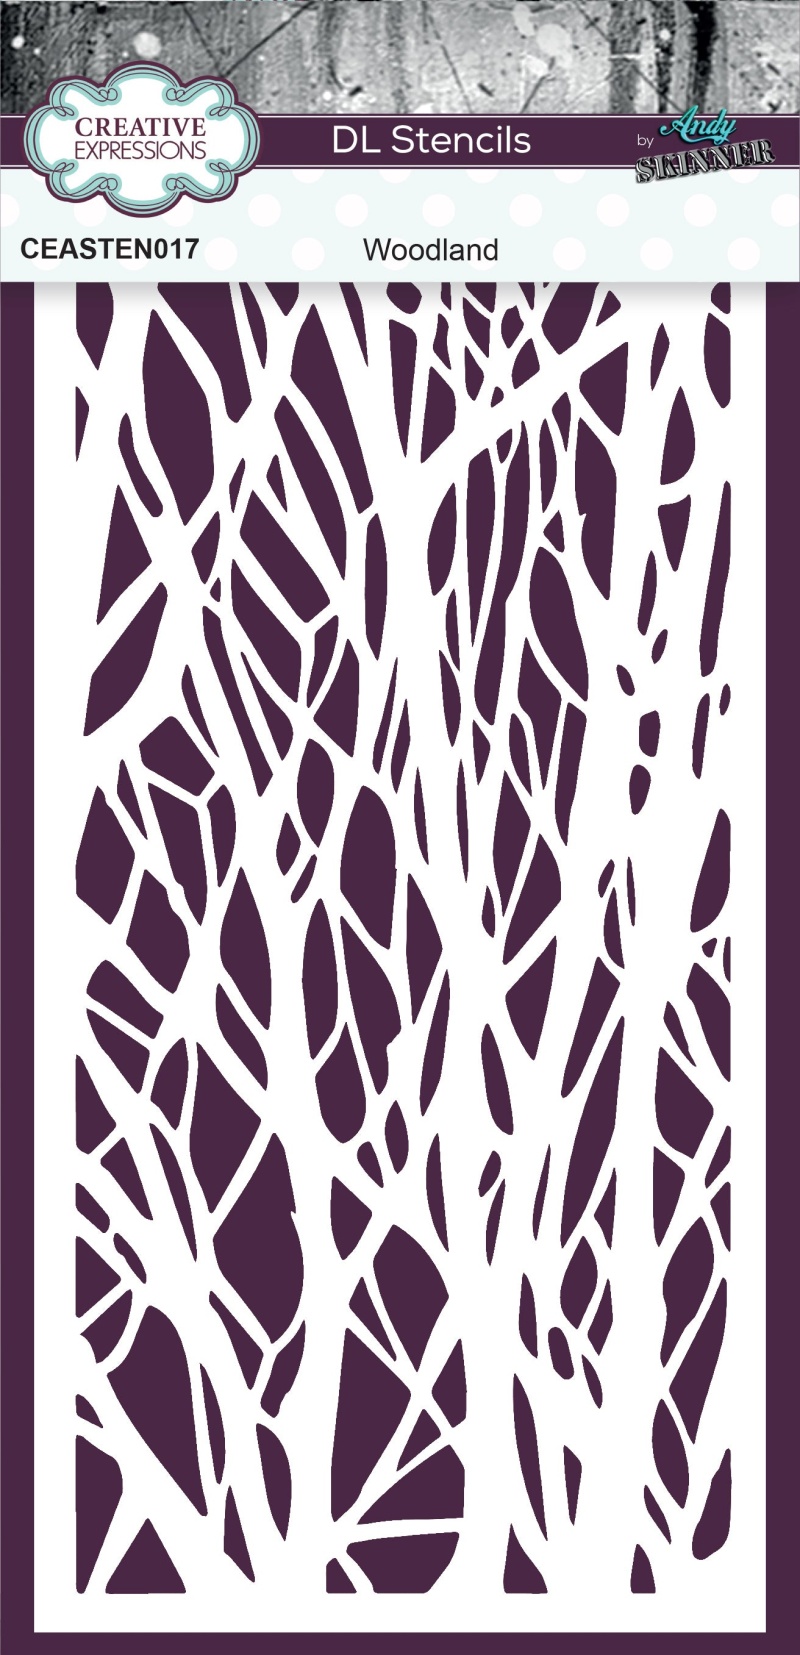 Creative Expressions Andy Skinner Woodland Dl Stencil